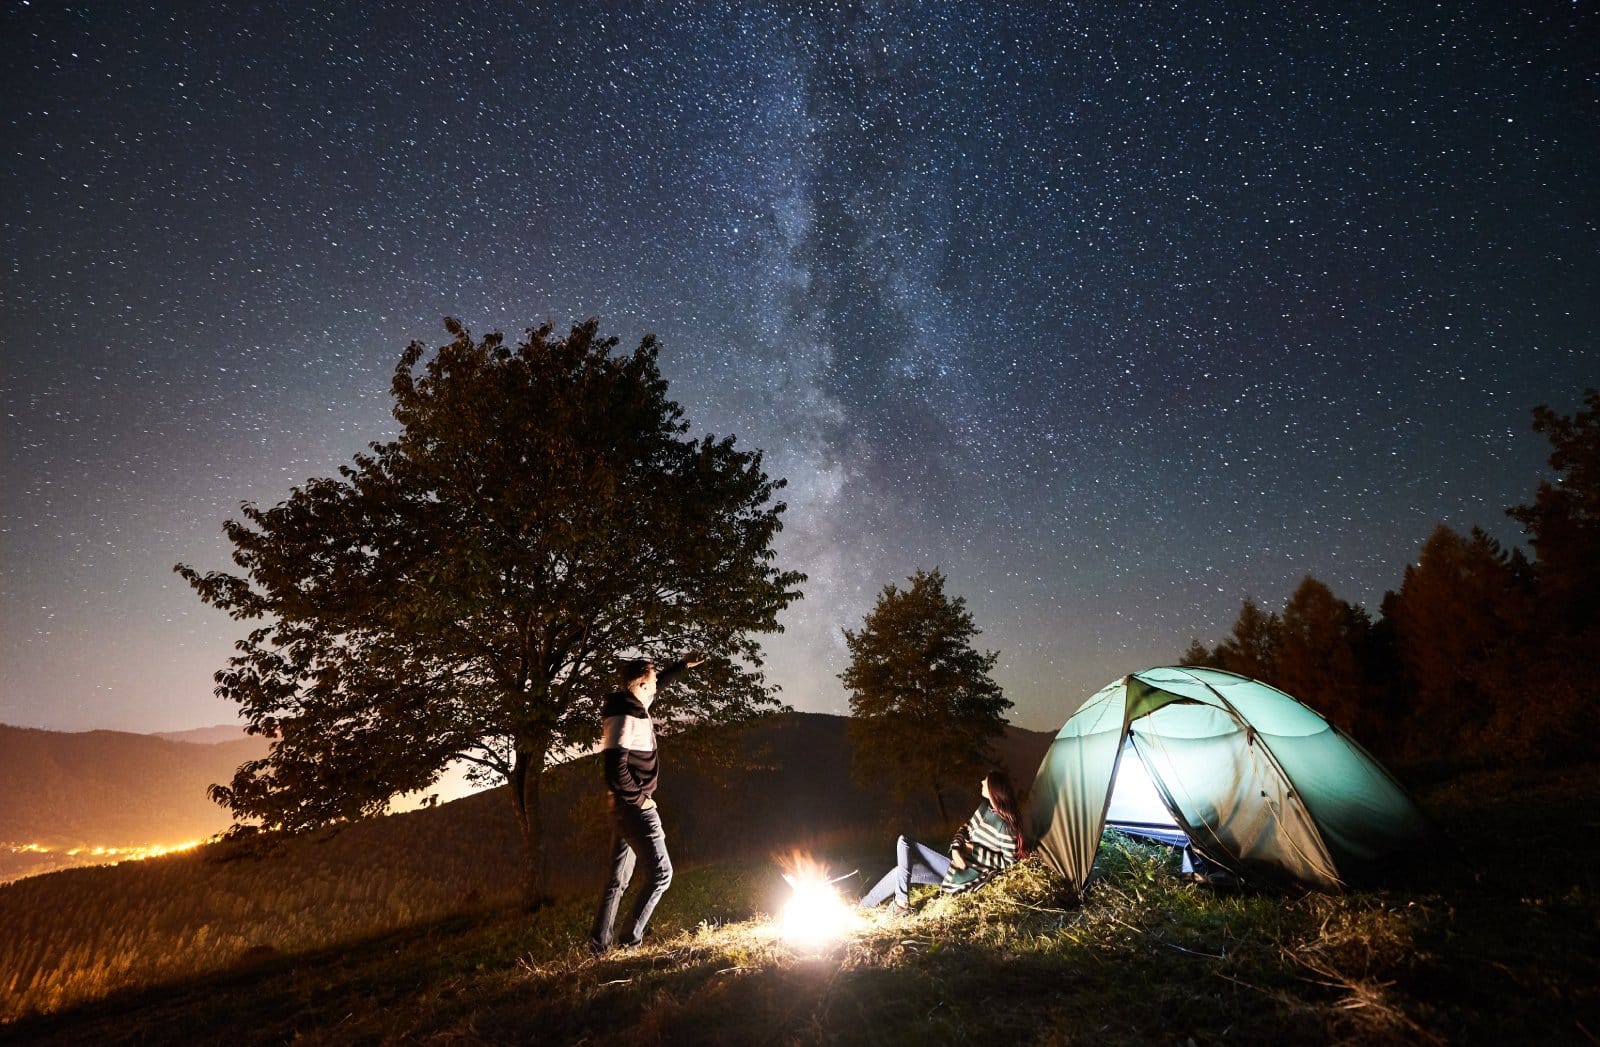 <p class="wp-caption-text">Image Credit: Shutterstock / anatoliy_gleb</p>  <p>Only in camping can you truly experience the whims of the weather, feeling the full sweep of nature’s temperaments, often all in one day.</p>